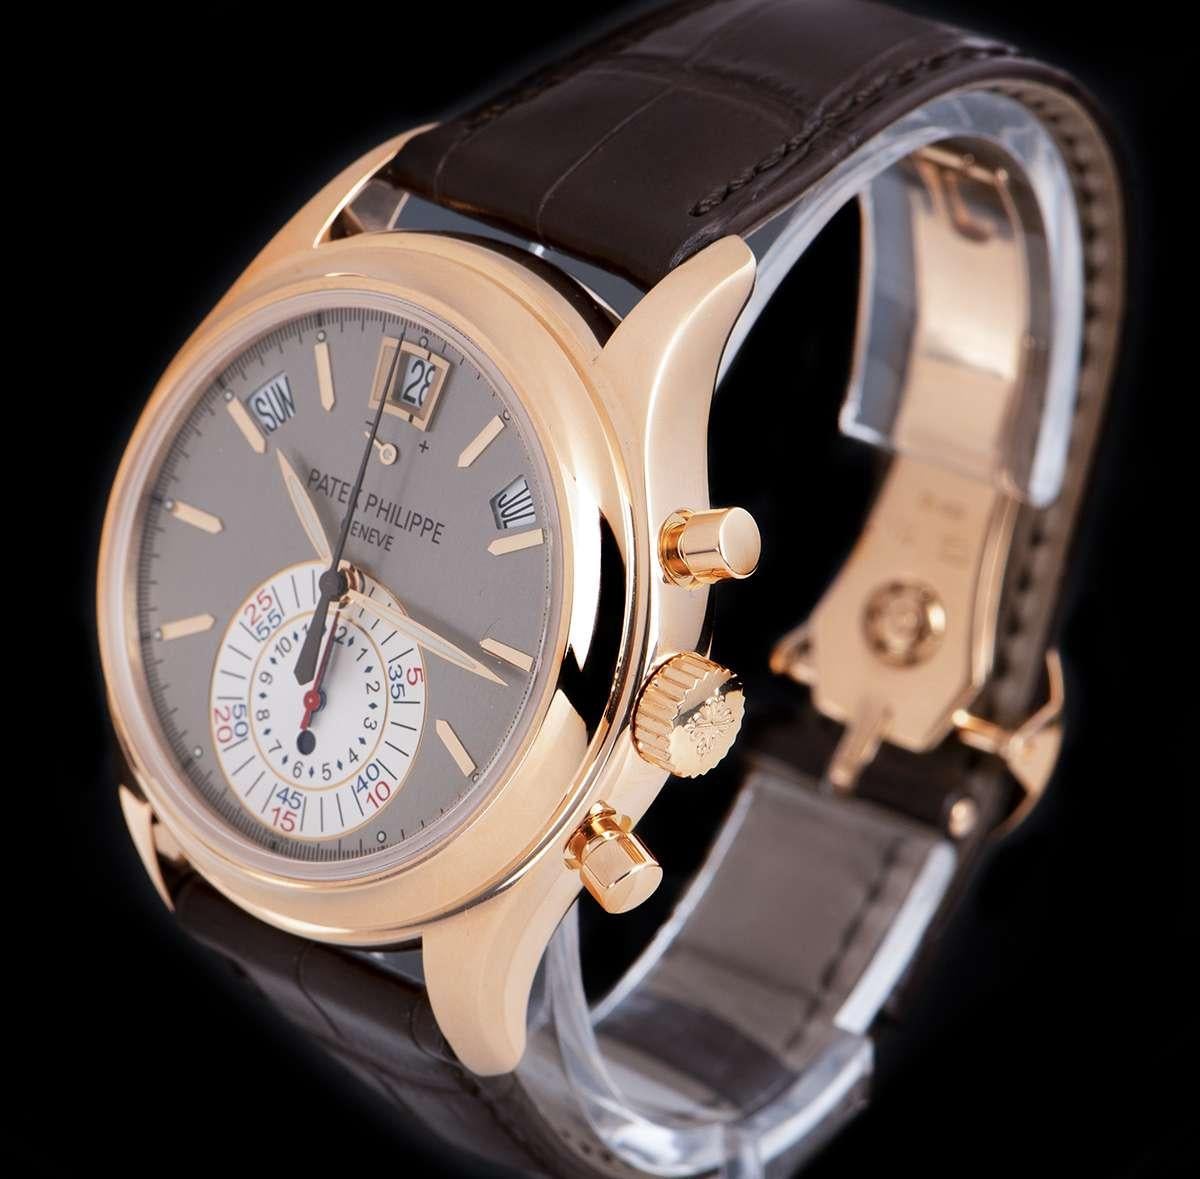 An 18k Rose Gold Annual Calendar Gents Wristwatch, grey dial with applied hour markers, month aperture between 1 and 2 0'clock, 60 minute and 12 hour mono counter at 6 0'clock, day aperture between 10 and 11 0'clock, date aperture and power reserve